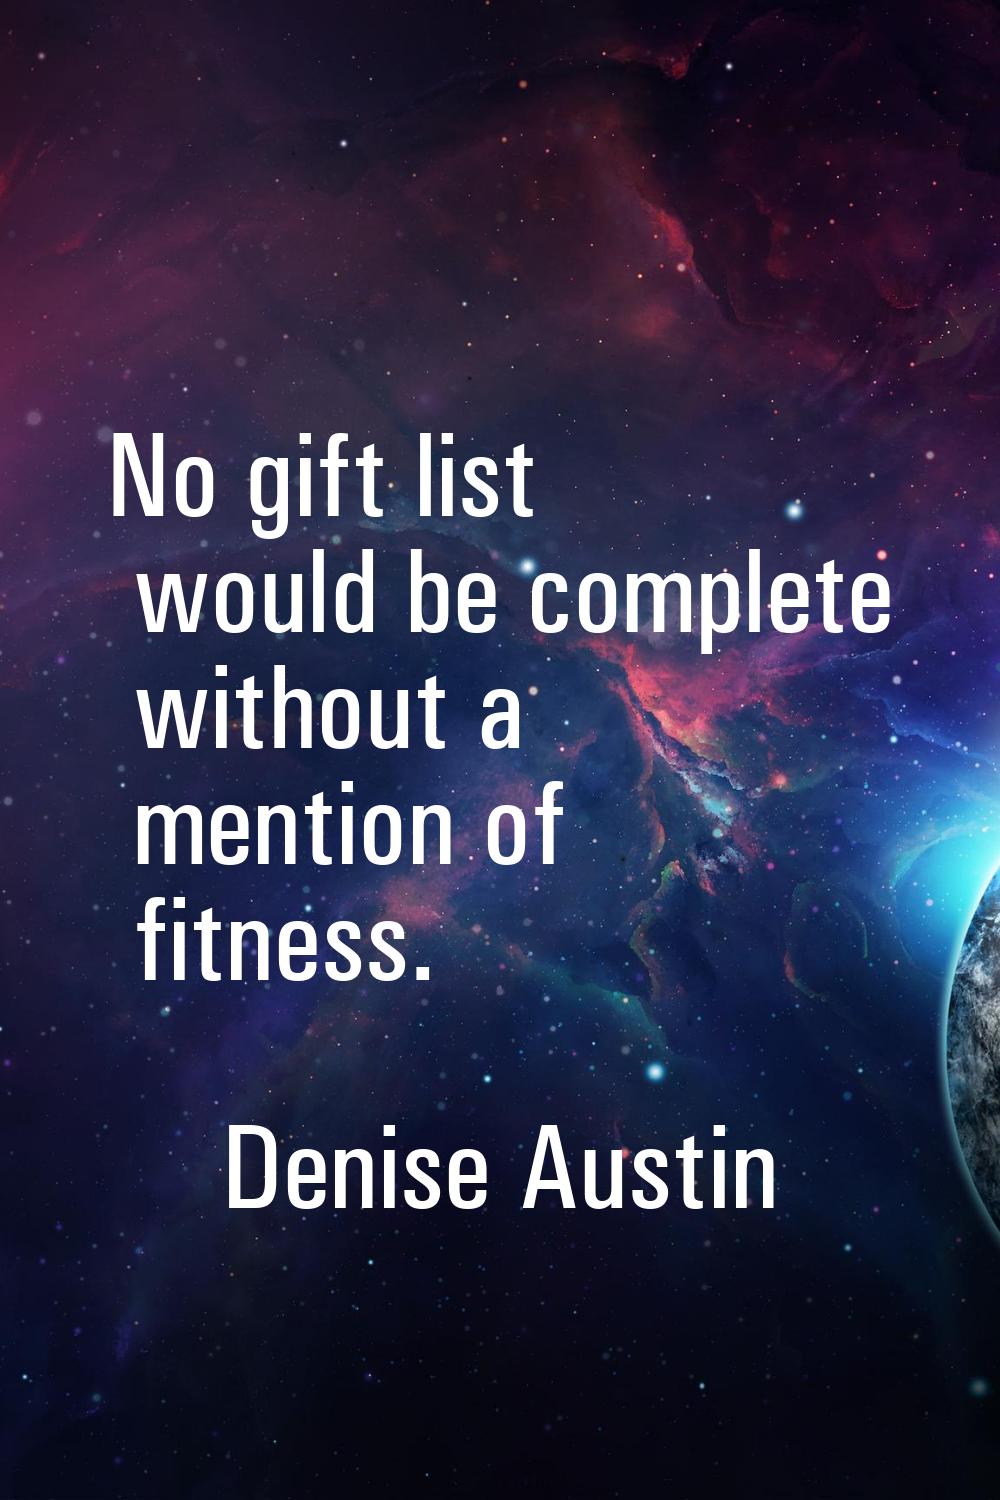 No gift list would be complete without a mention of fitness.